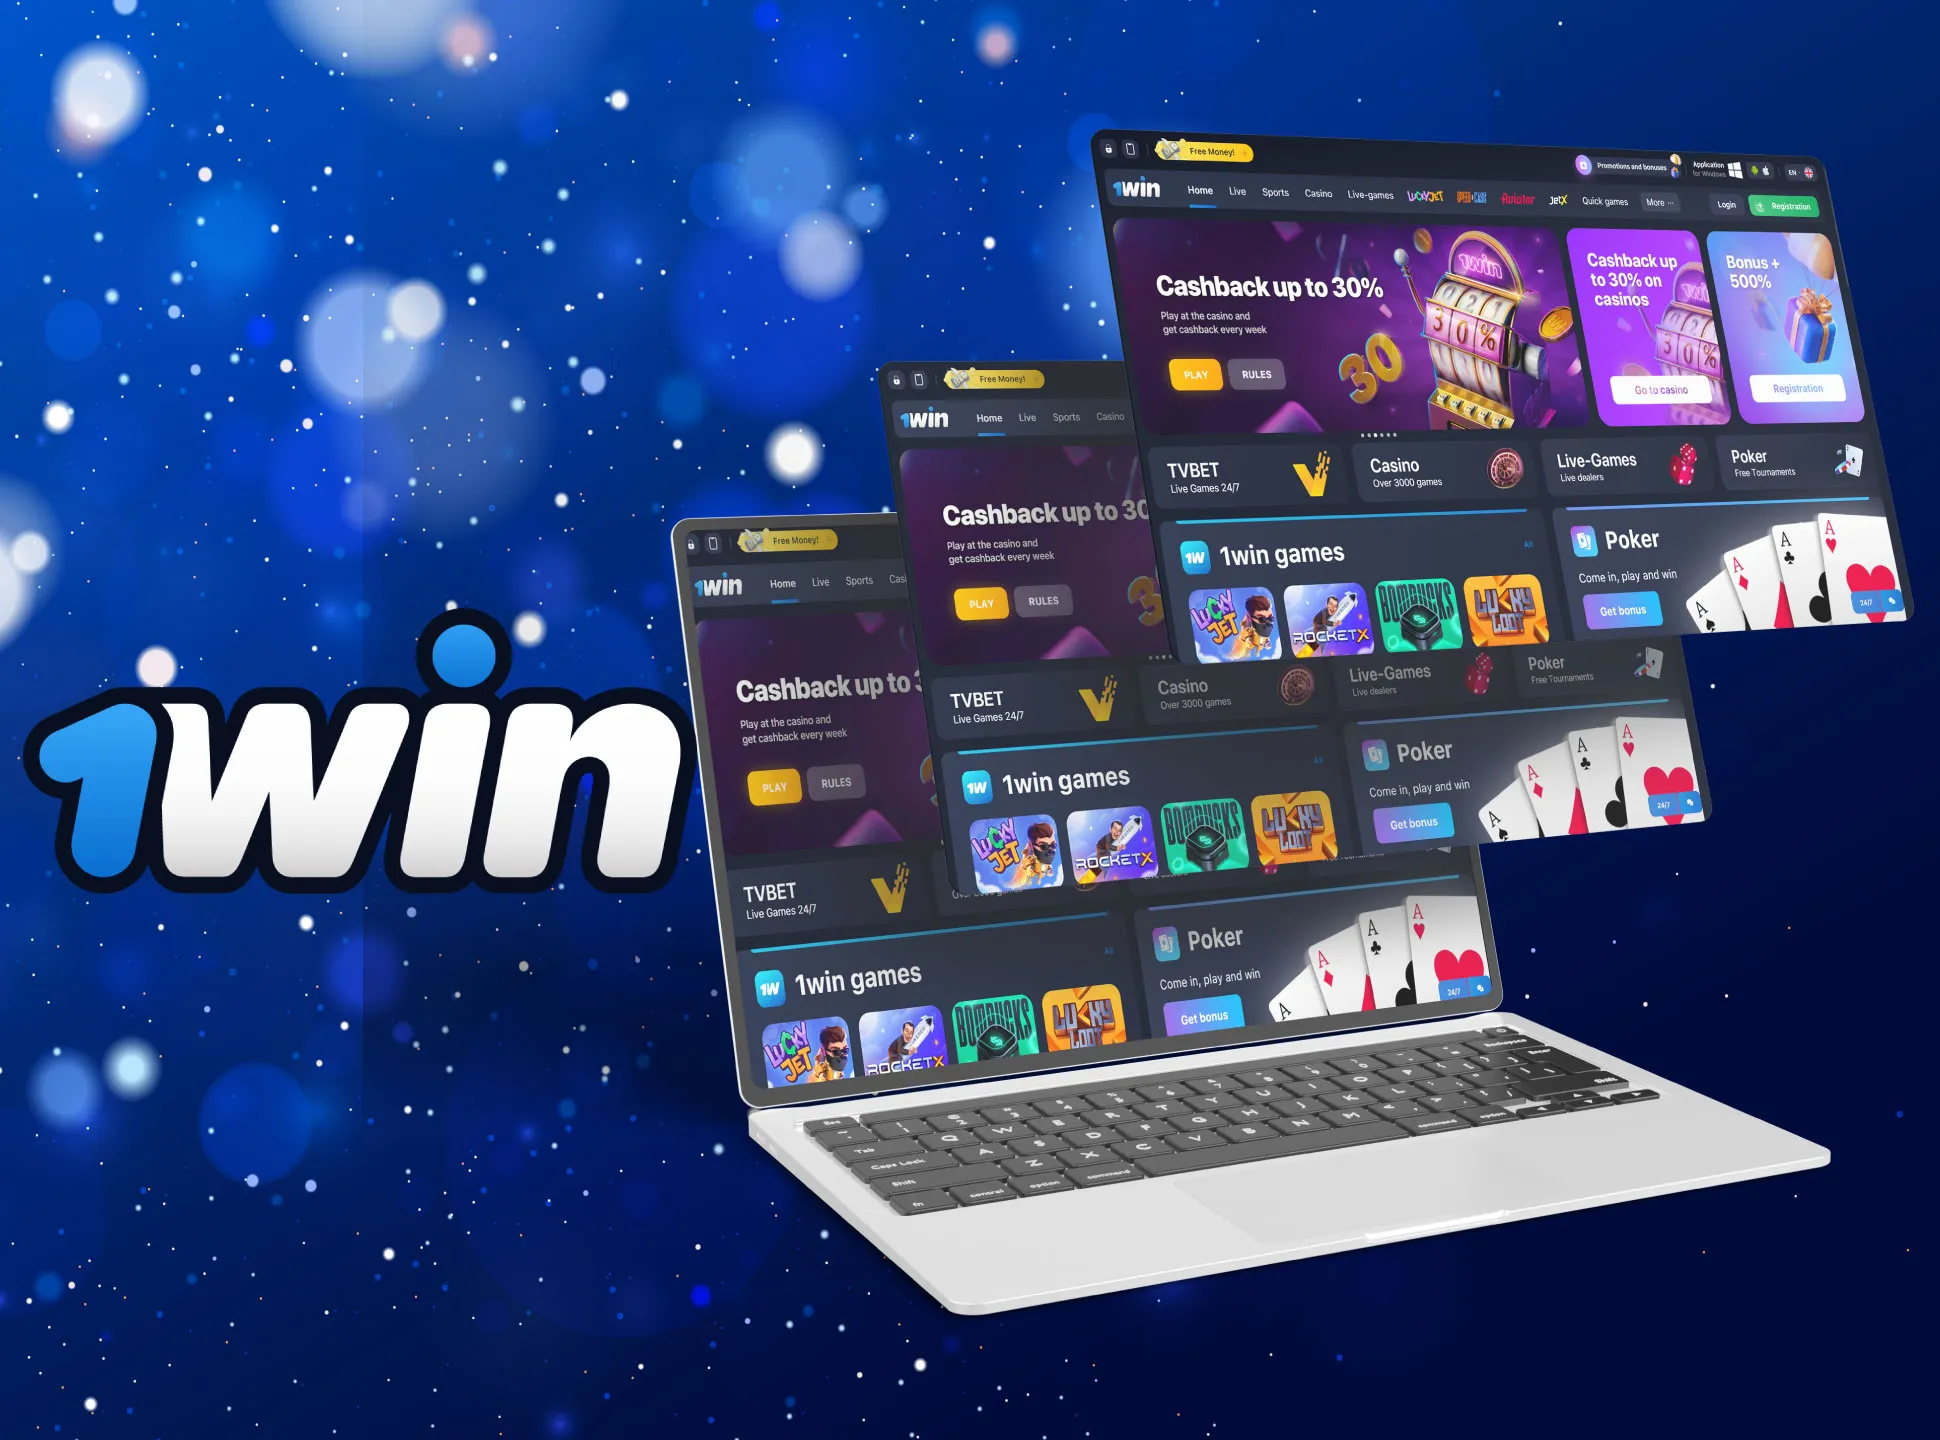 Leran more about the 1win sportsbook and online casino.